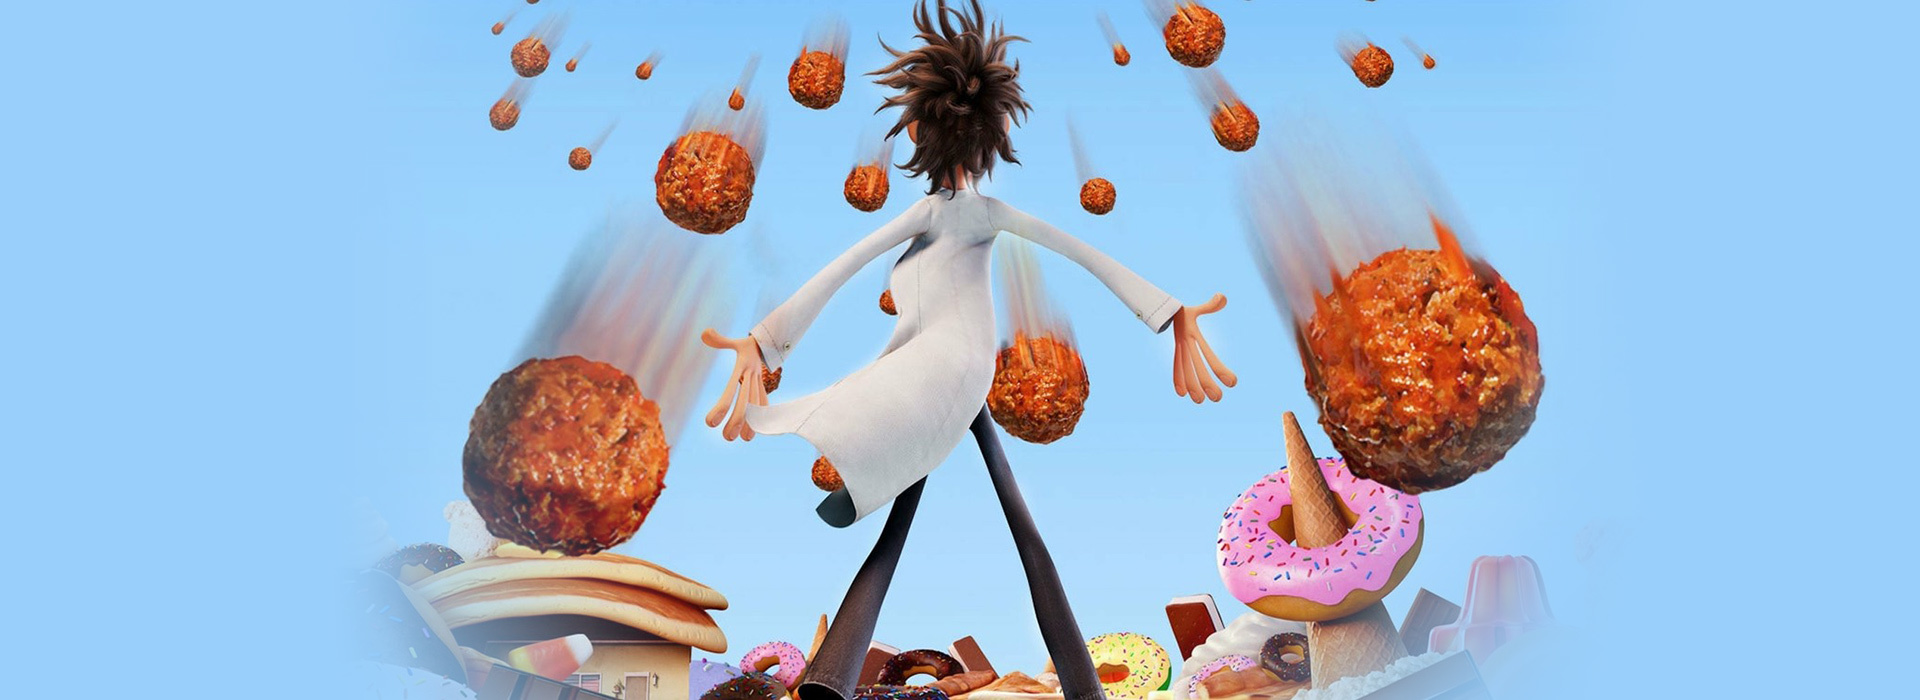 Movie poster Cloudy with a Chance of Meatballs